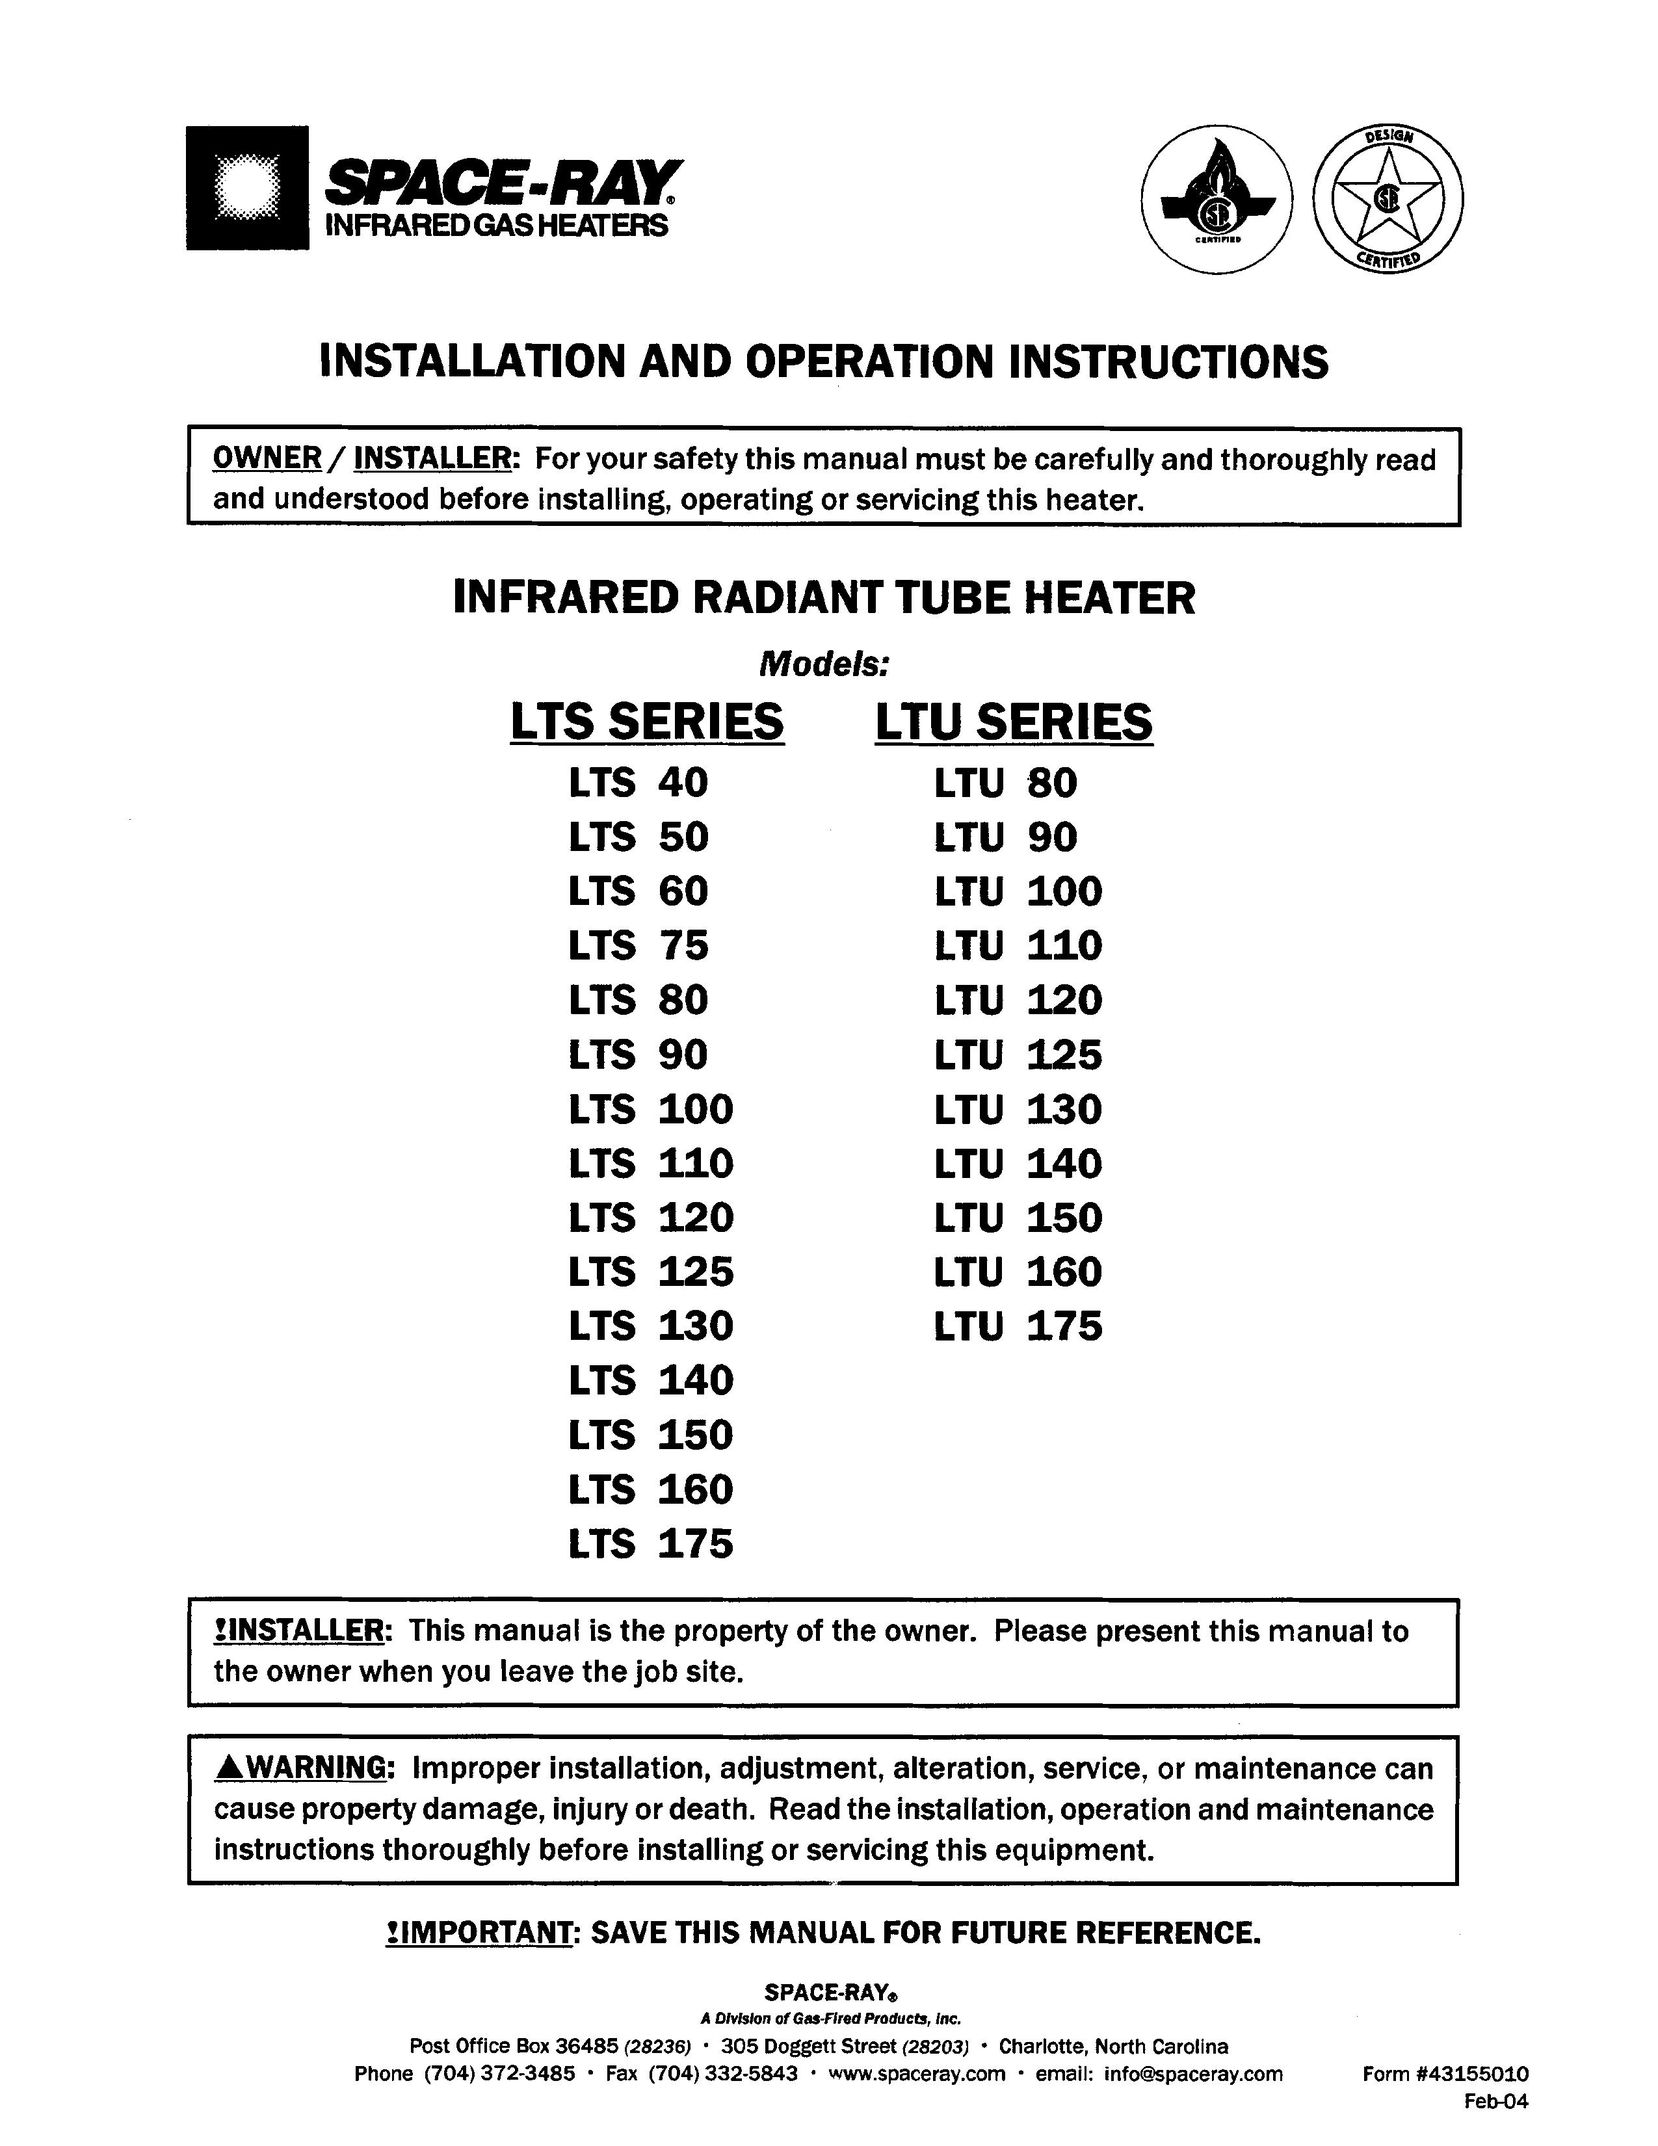 Gas-Fired Products LTU 130 Electric Heater User Manual